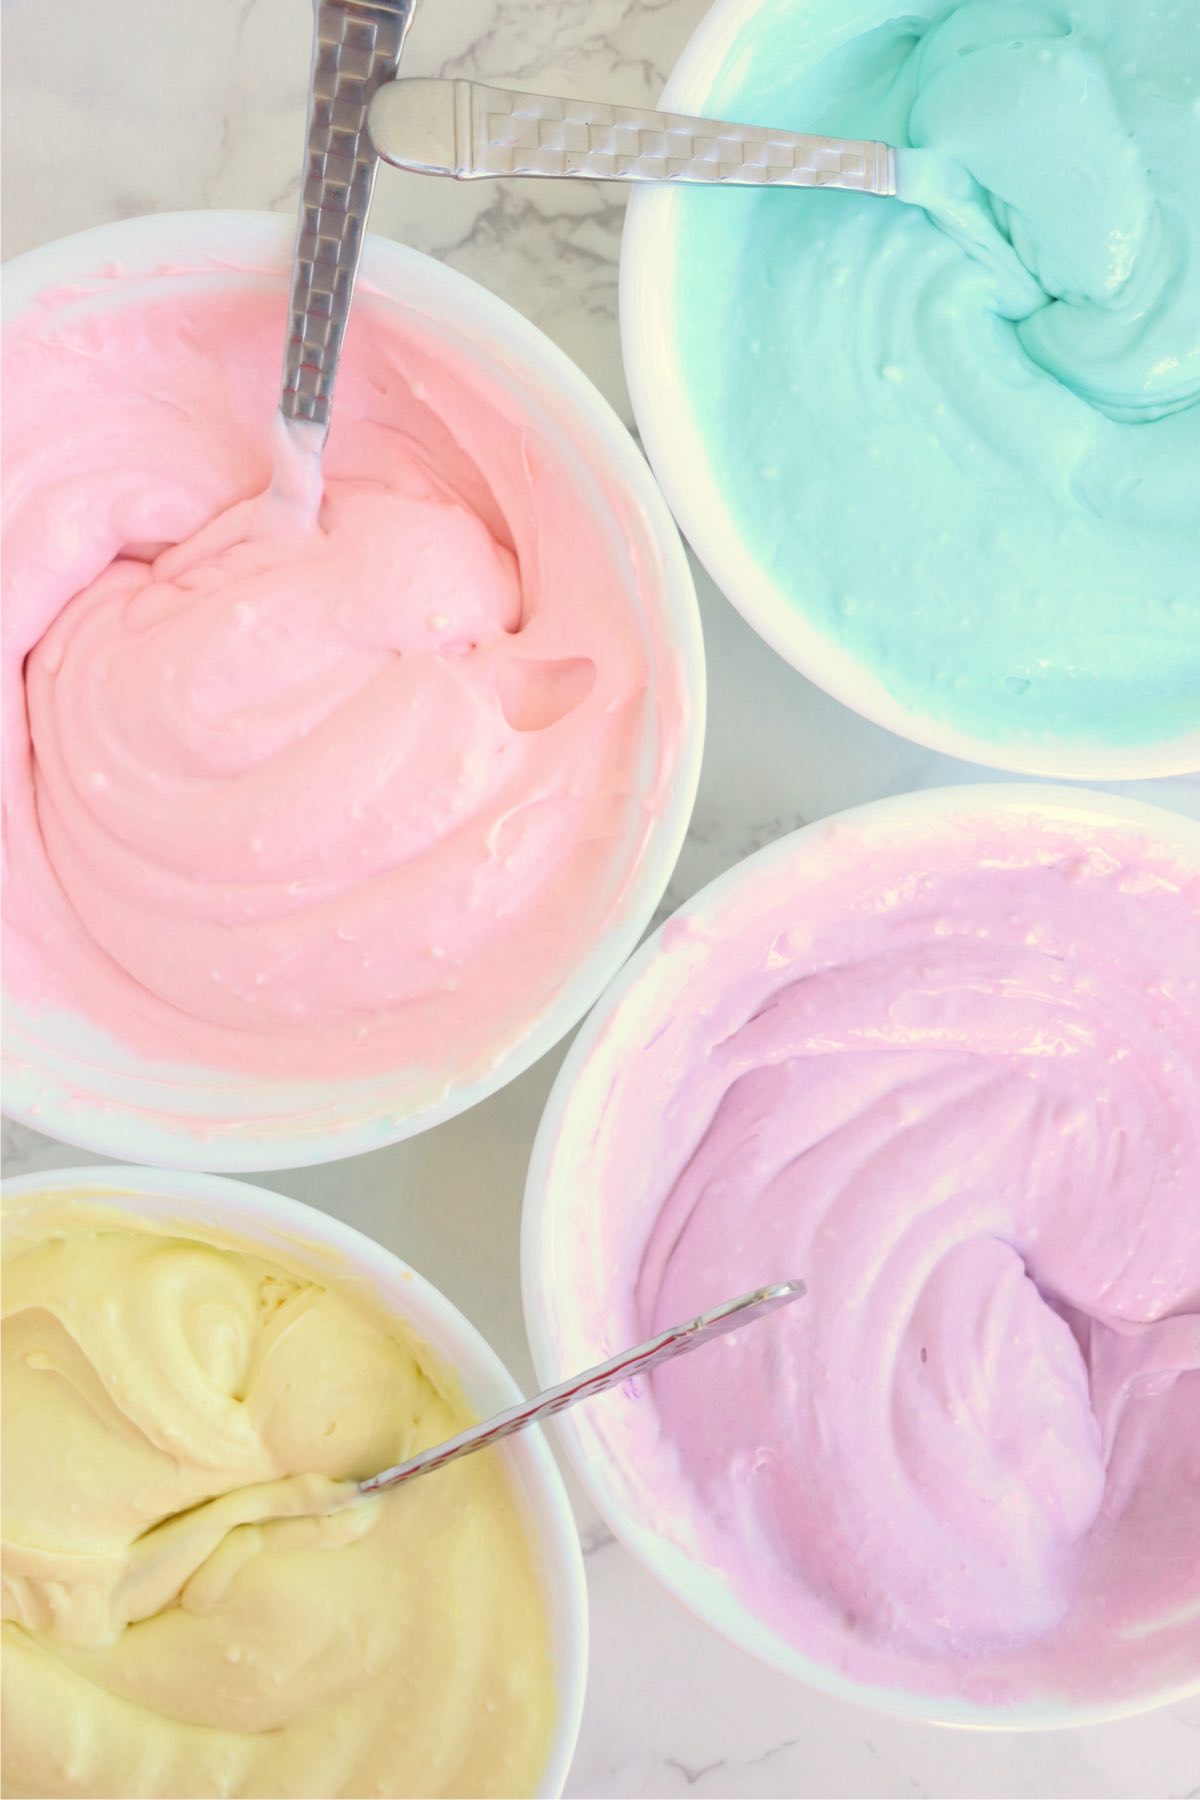 Four bowls of pastel colored cheesecake batter